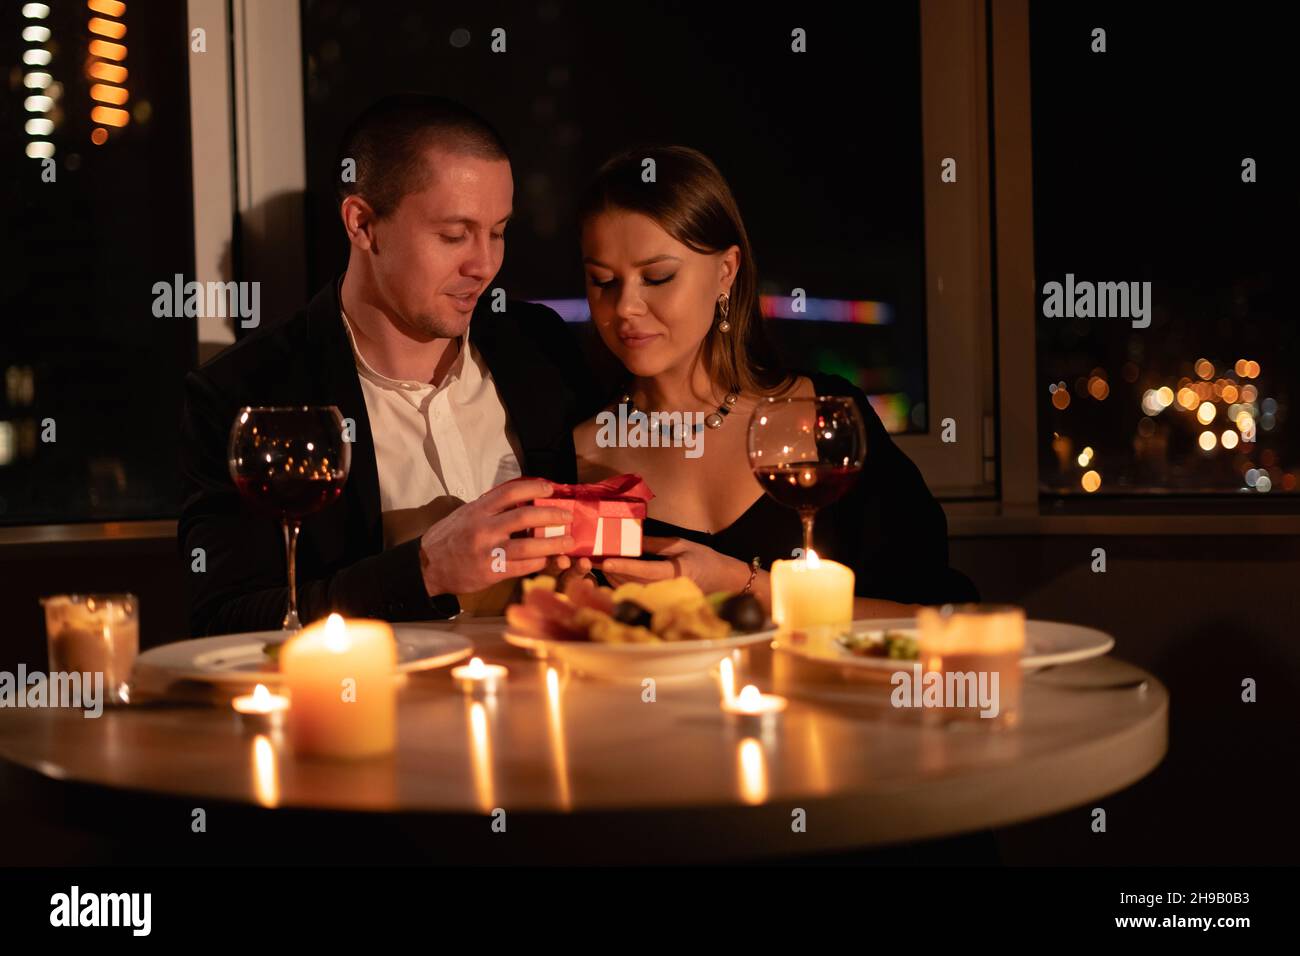 Valentine's day date by candlelight evening, romantic dinner for two, man giving girl an anniversary gift at the table, man and woman relationship Stock Photo